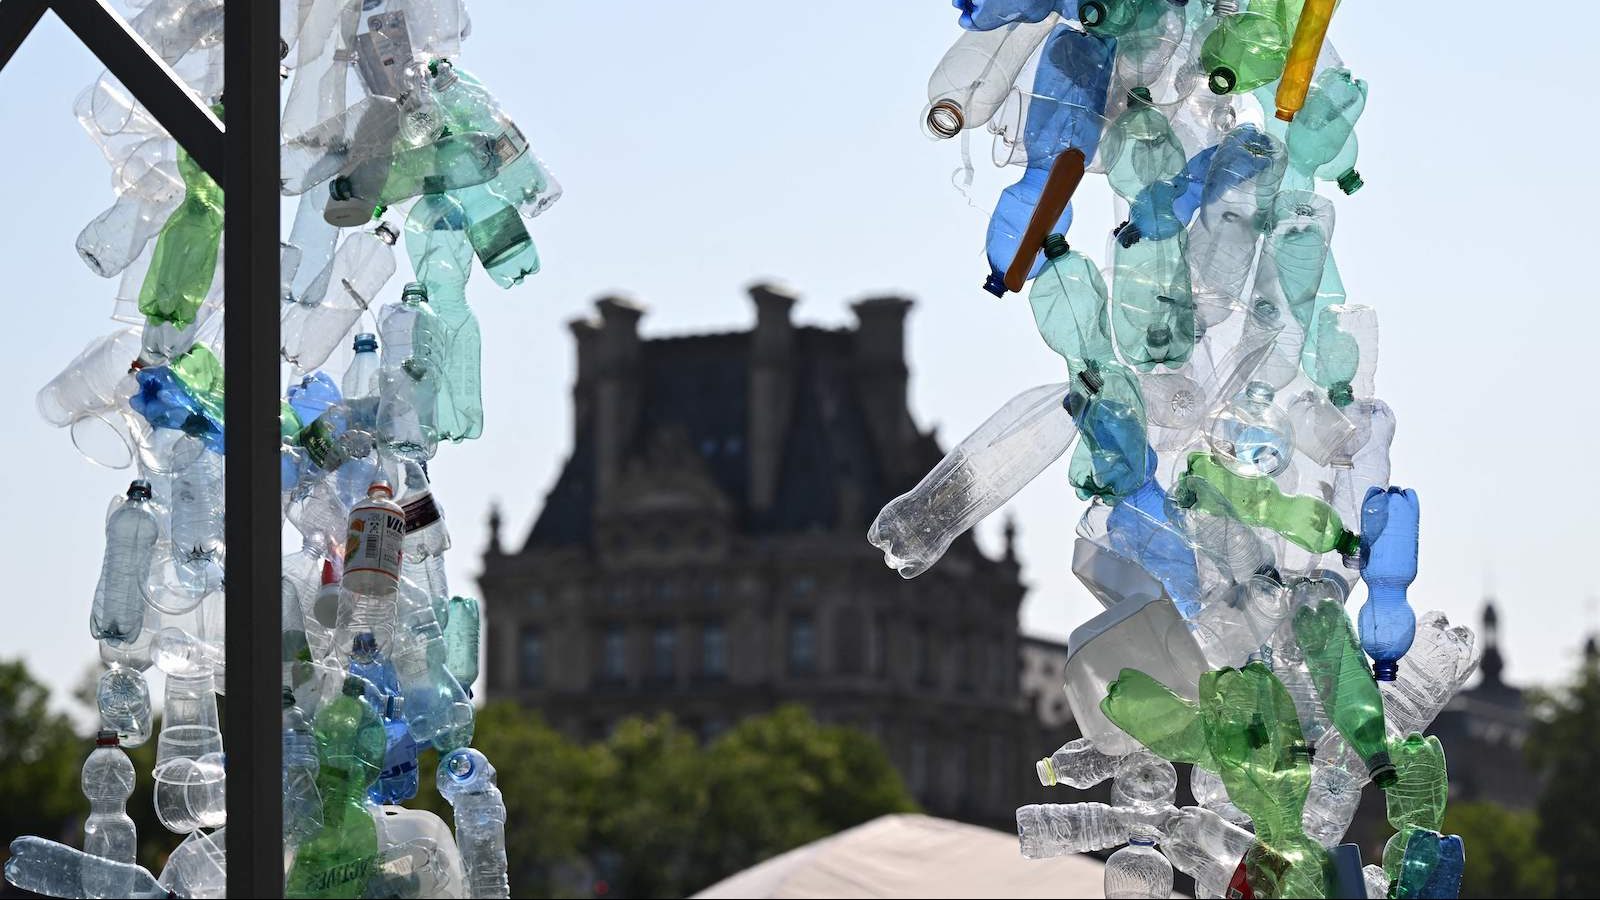 Plastic bottles in a sculpture, with <a href='https://sans10400.org.za/en/landscaping-2/swimming-pools-2' target='_blank'>building</a> in background